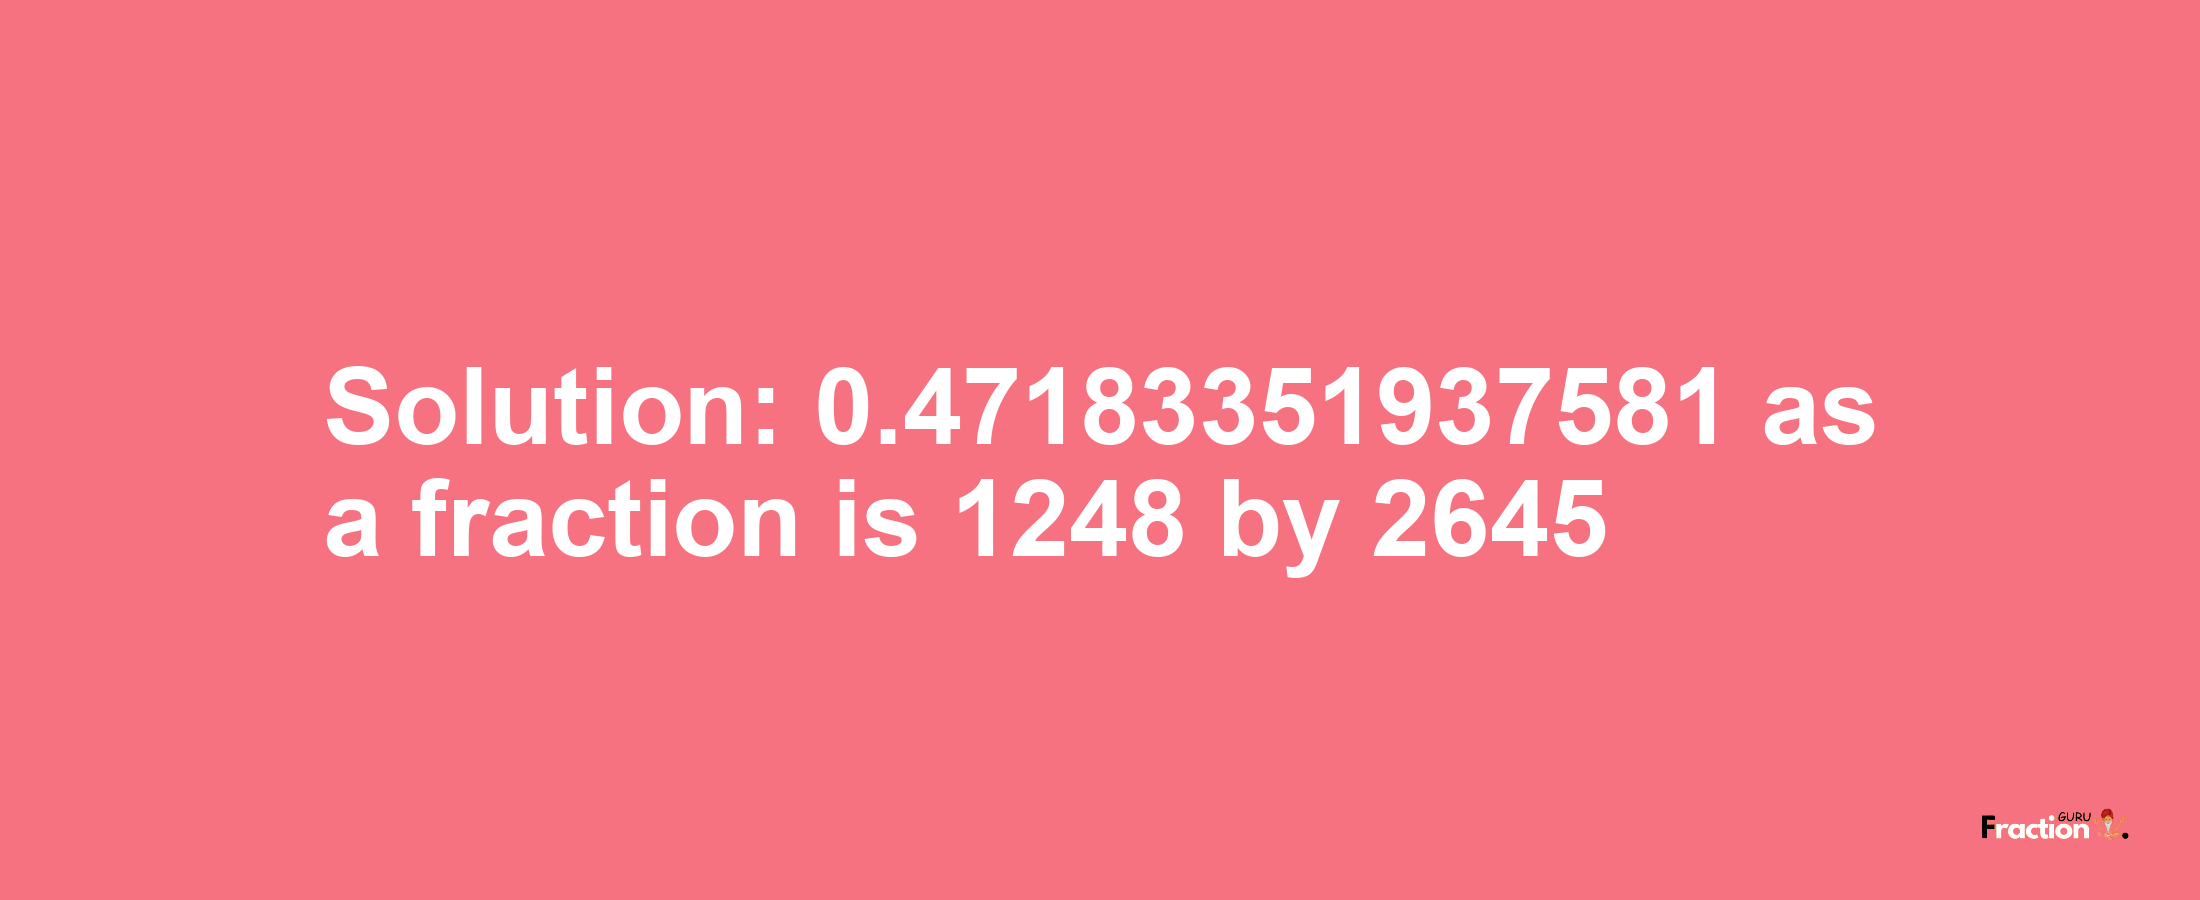 Solution:0.47183351937581 as a fraction is 1248/2645